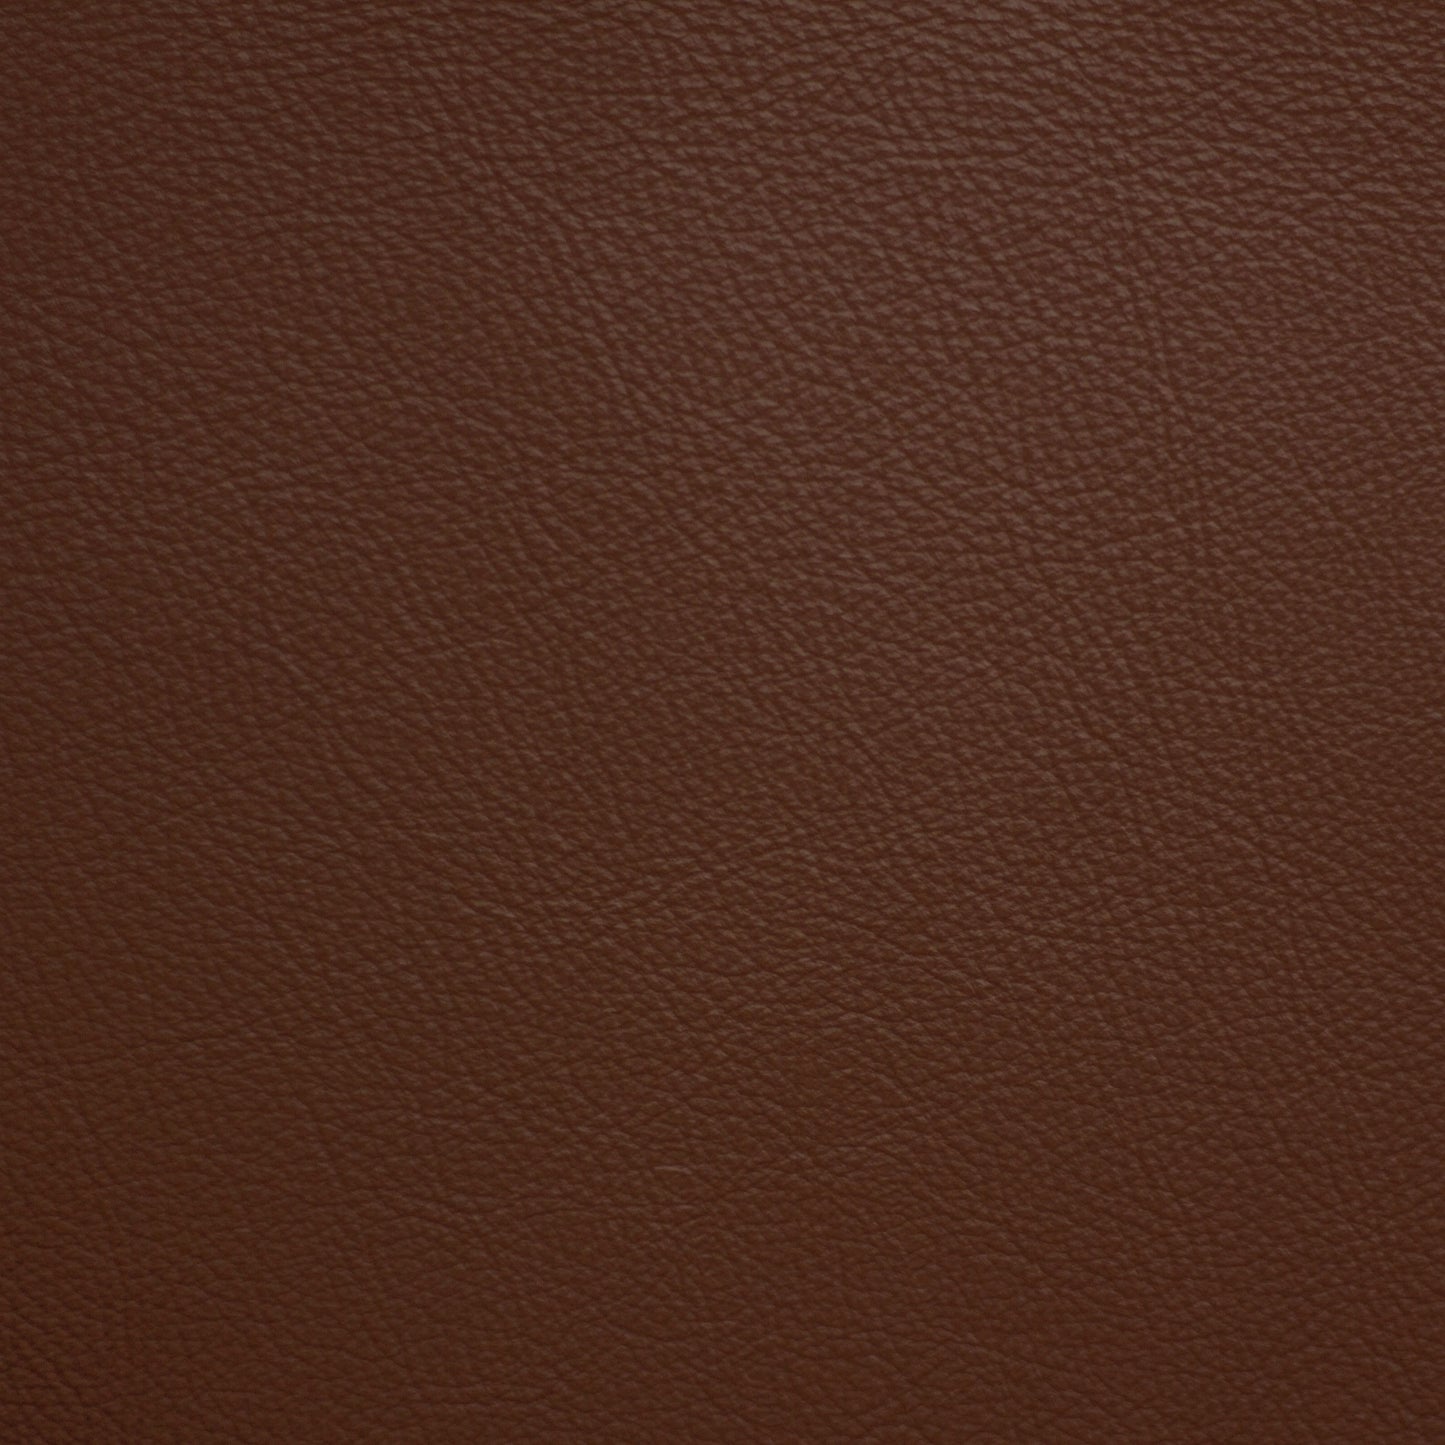 Diva, Polynesian, Iconic® Antimicrobial & Cleanable, Hospitality Leather Hide